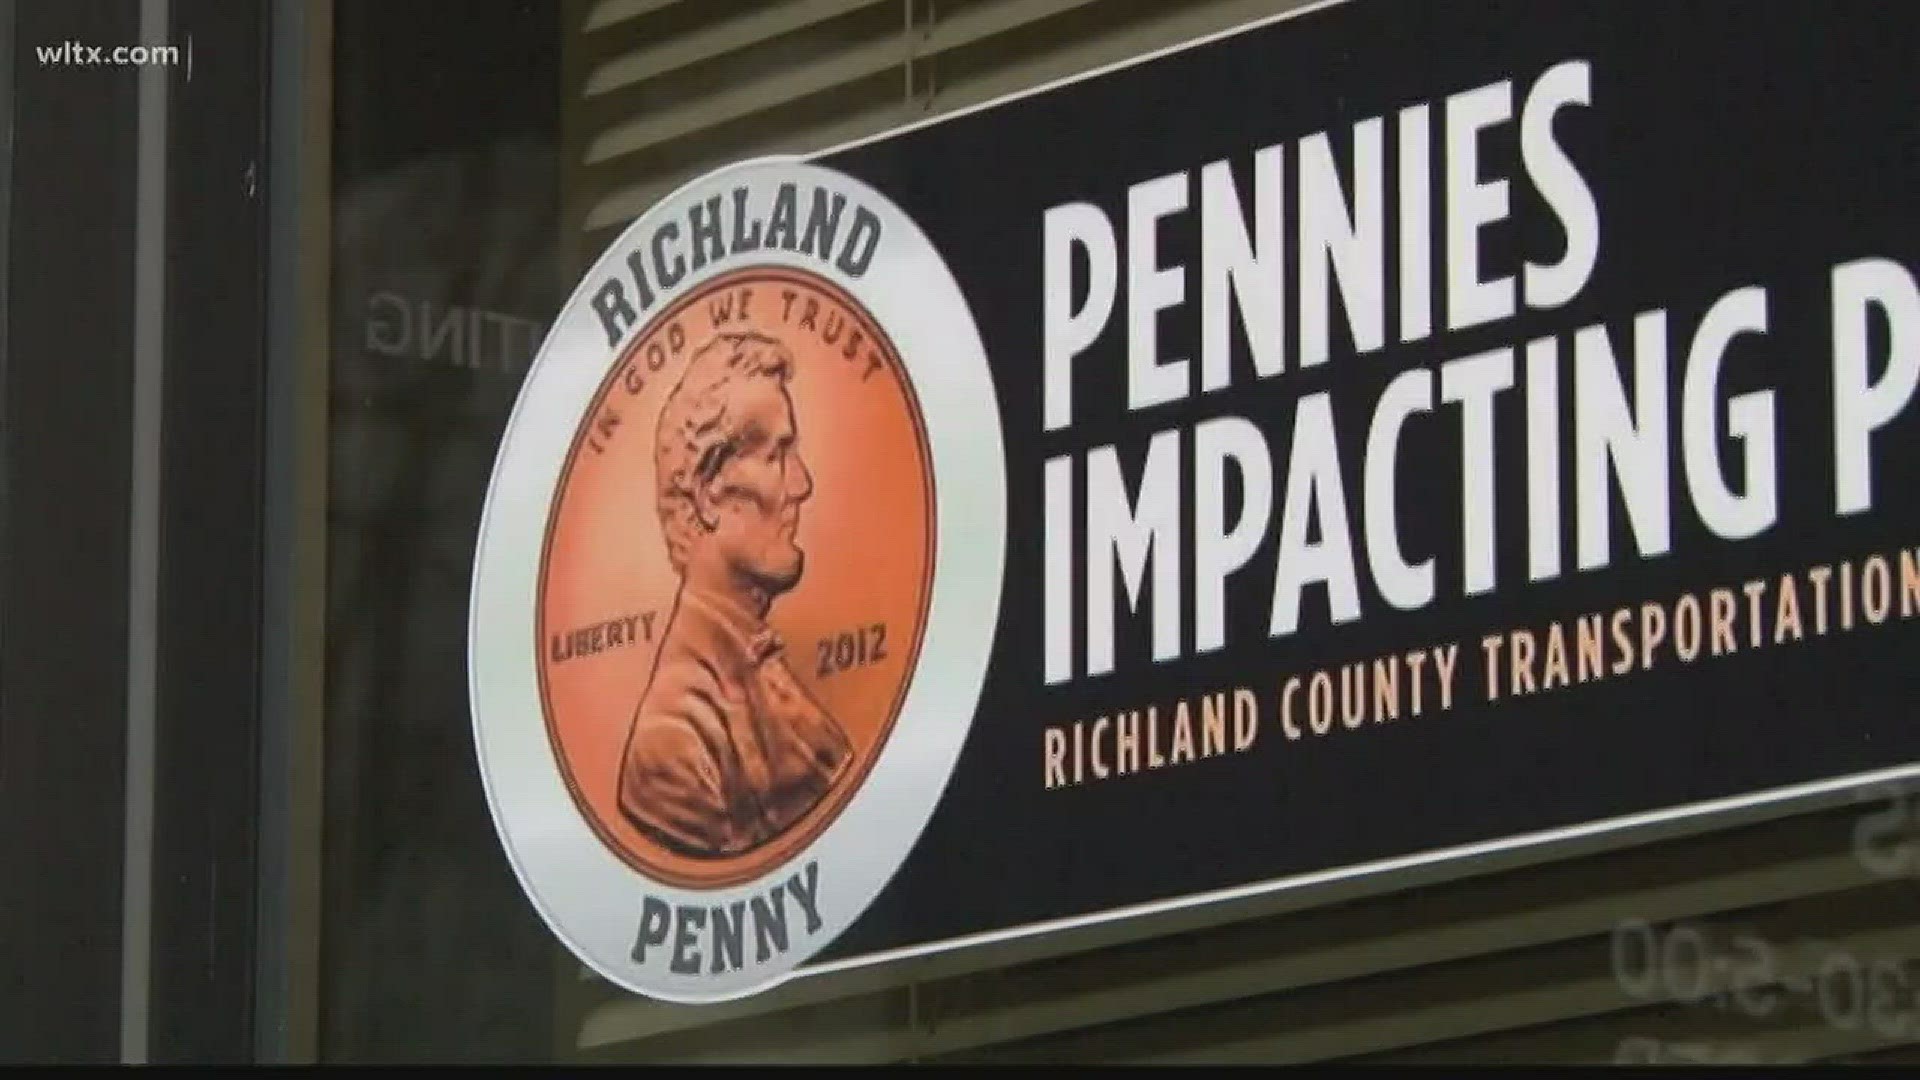 After reviewing an audit by the Department of Revenue the state Supreme Court says Richland County was improperly spending some of the Penny Tax money